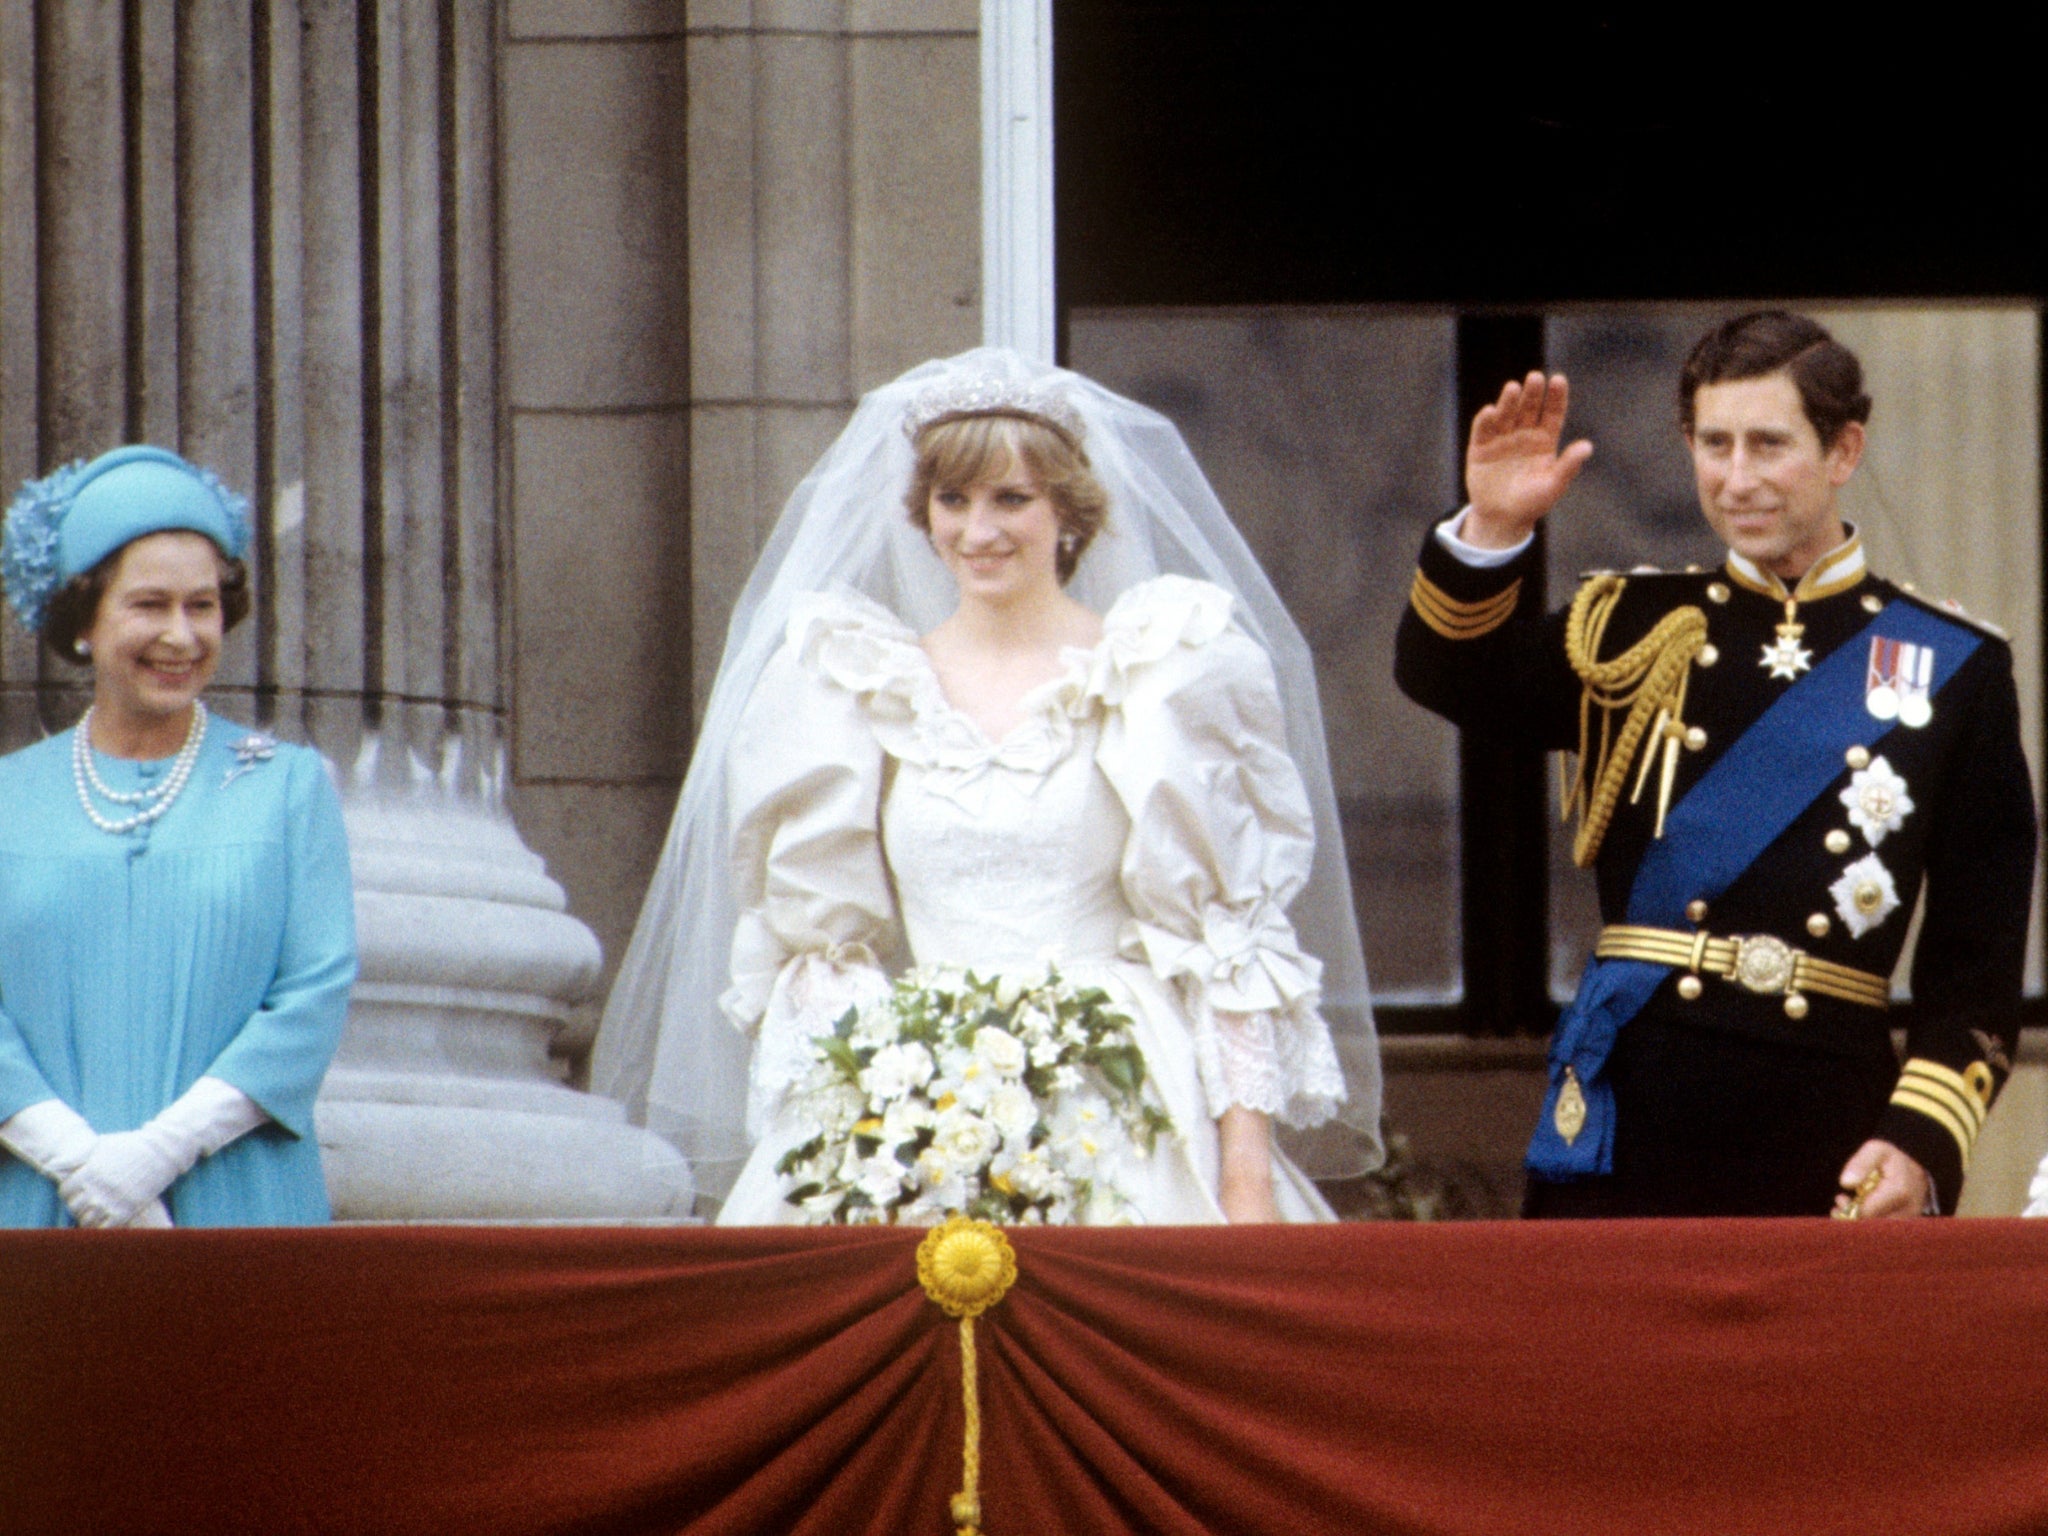 The Queen with Princess Diana and Prince Charles on the balcony of Buckingham Palace on their wedding day in 1981